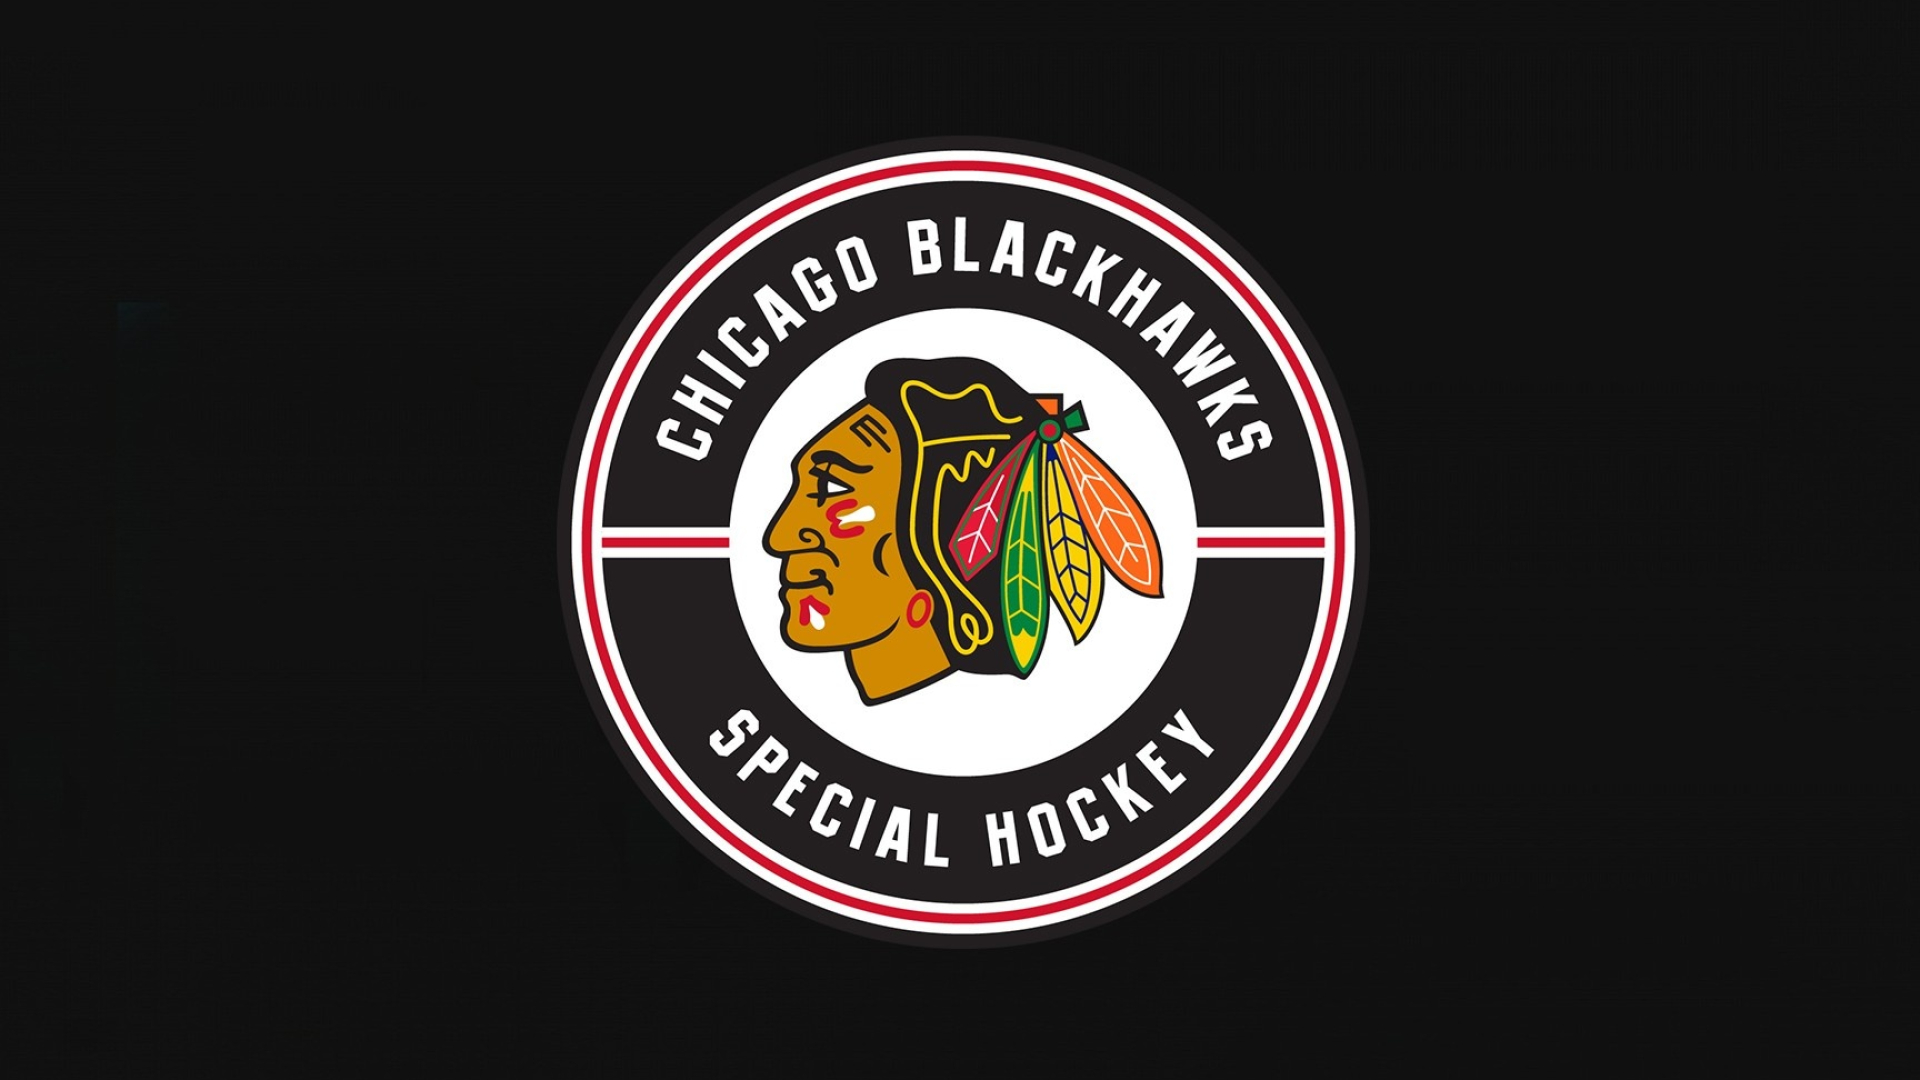 Chicago Blackhawks: One of the most recognized franchises in all of sports. 1920x1080 Full HD Wallpaper.